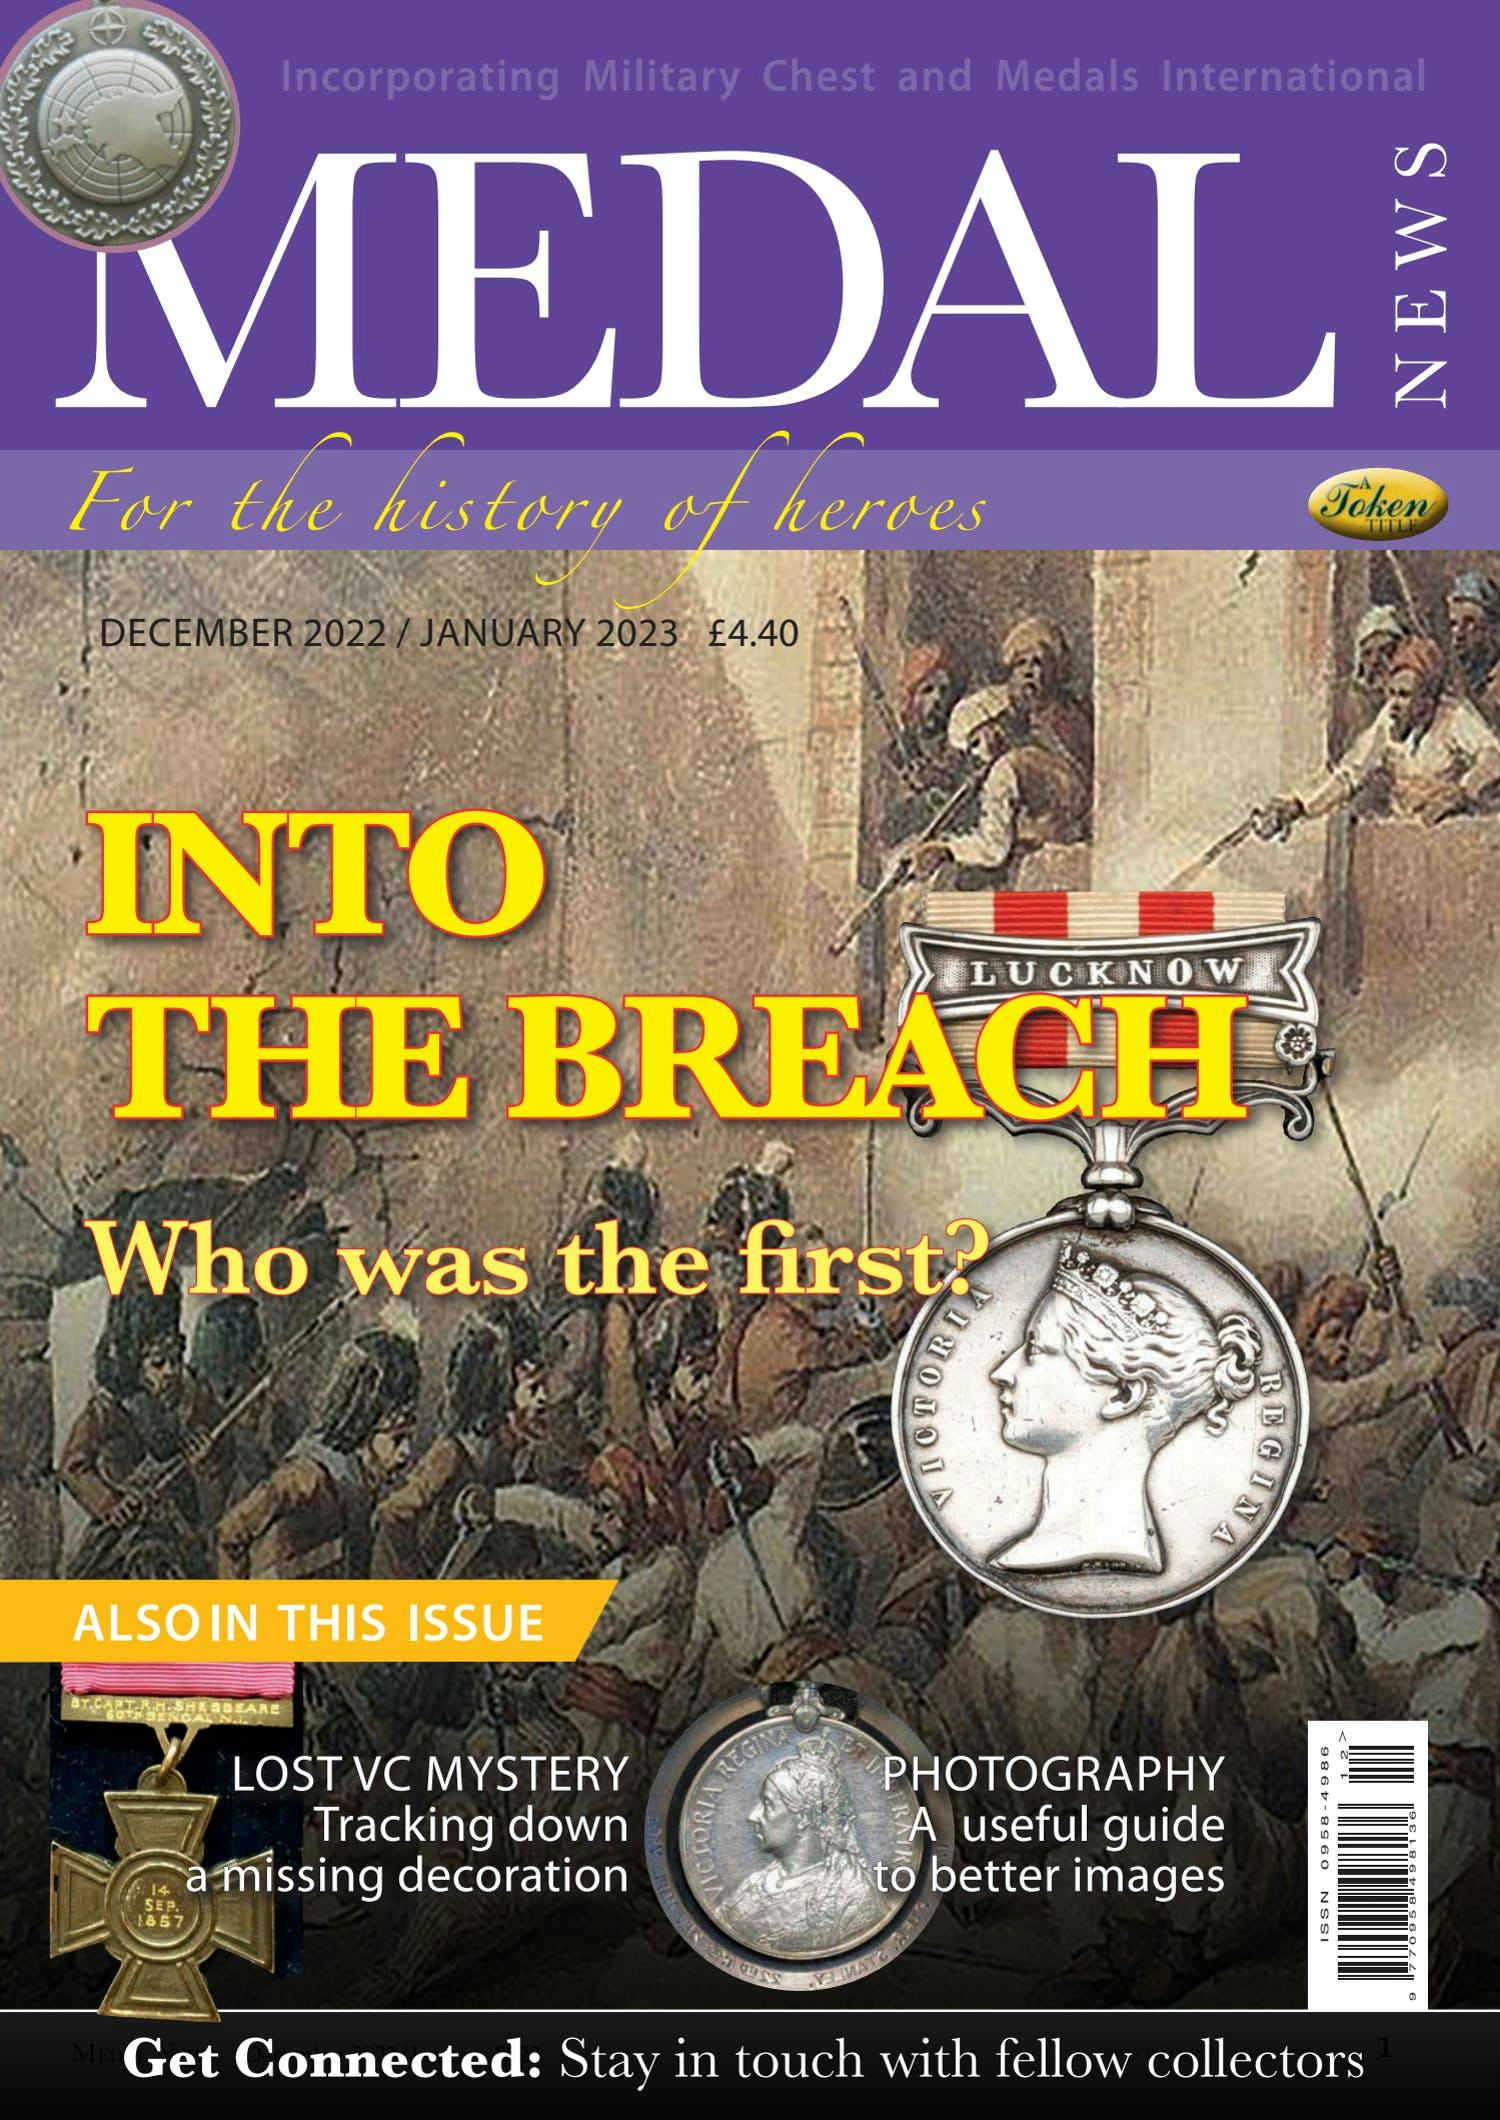 The front cover of Medal News, January 2023 - Volume 61, Number 1